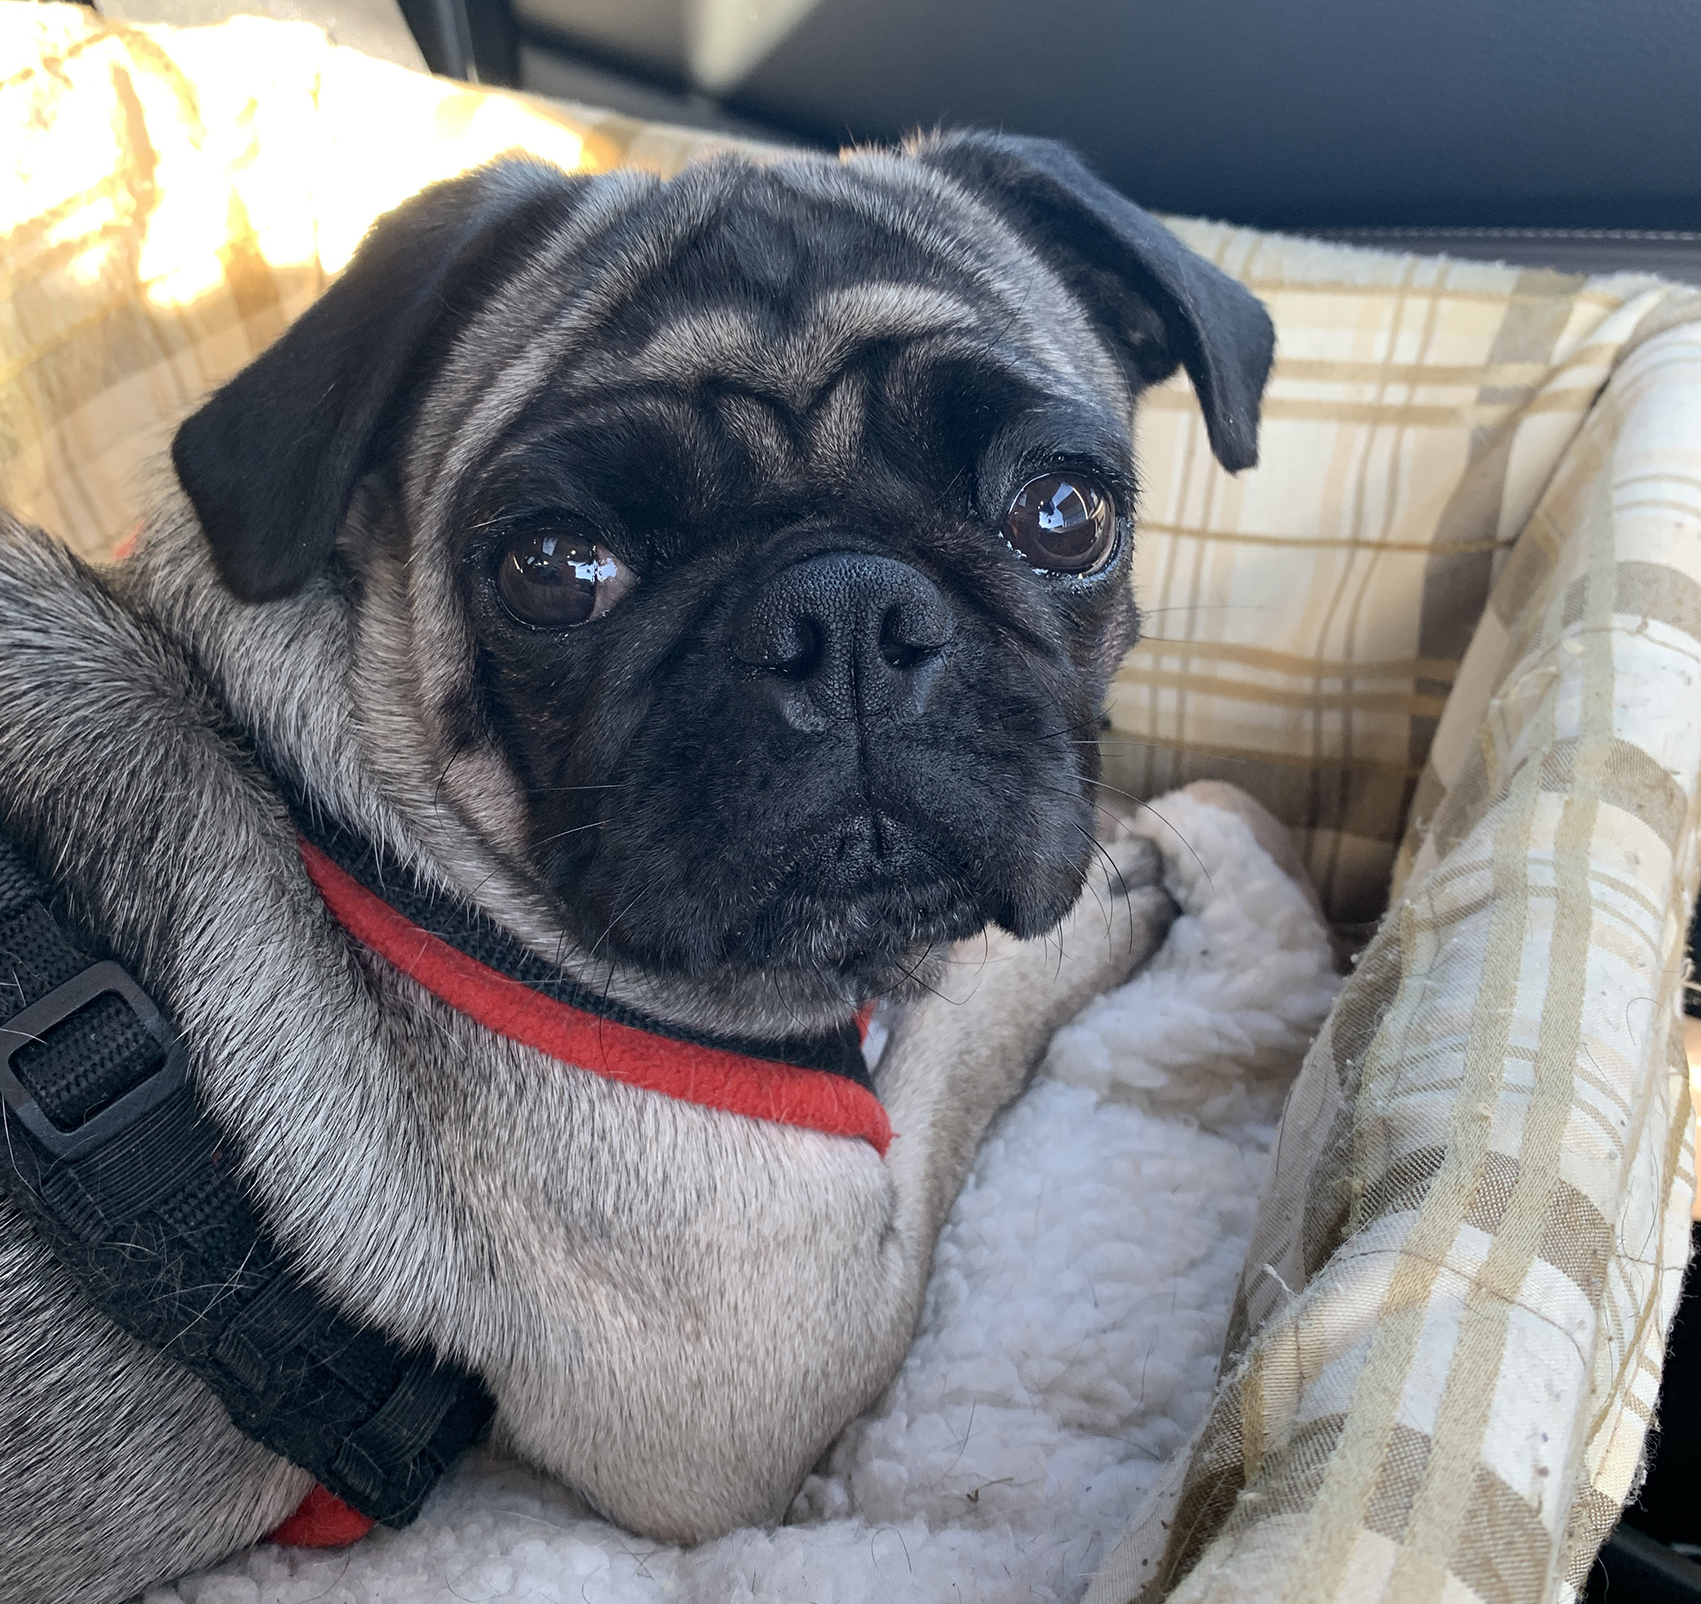 Adoption for Lily - image Wilma on https://pugprotectiontrust.org